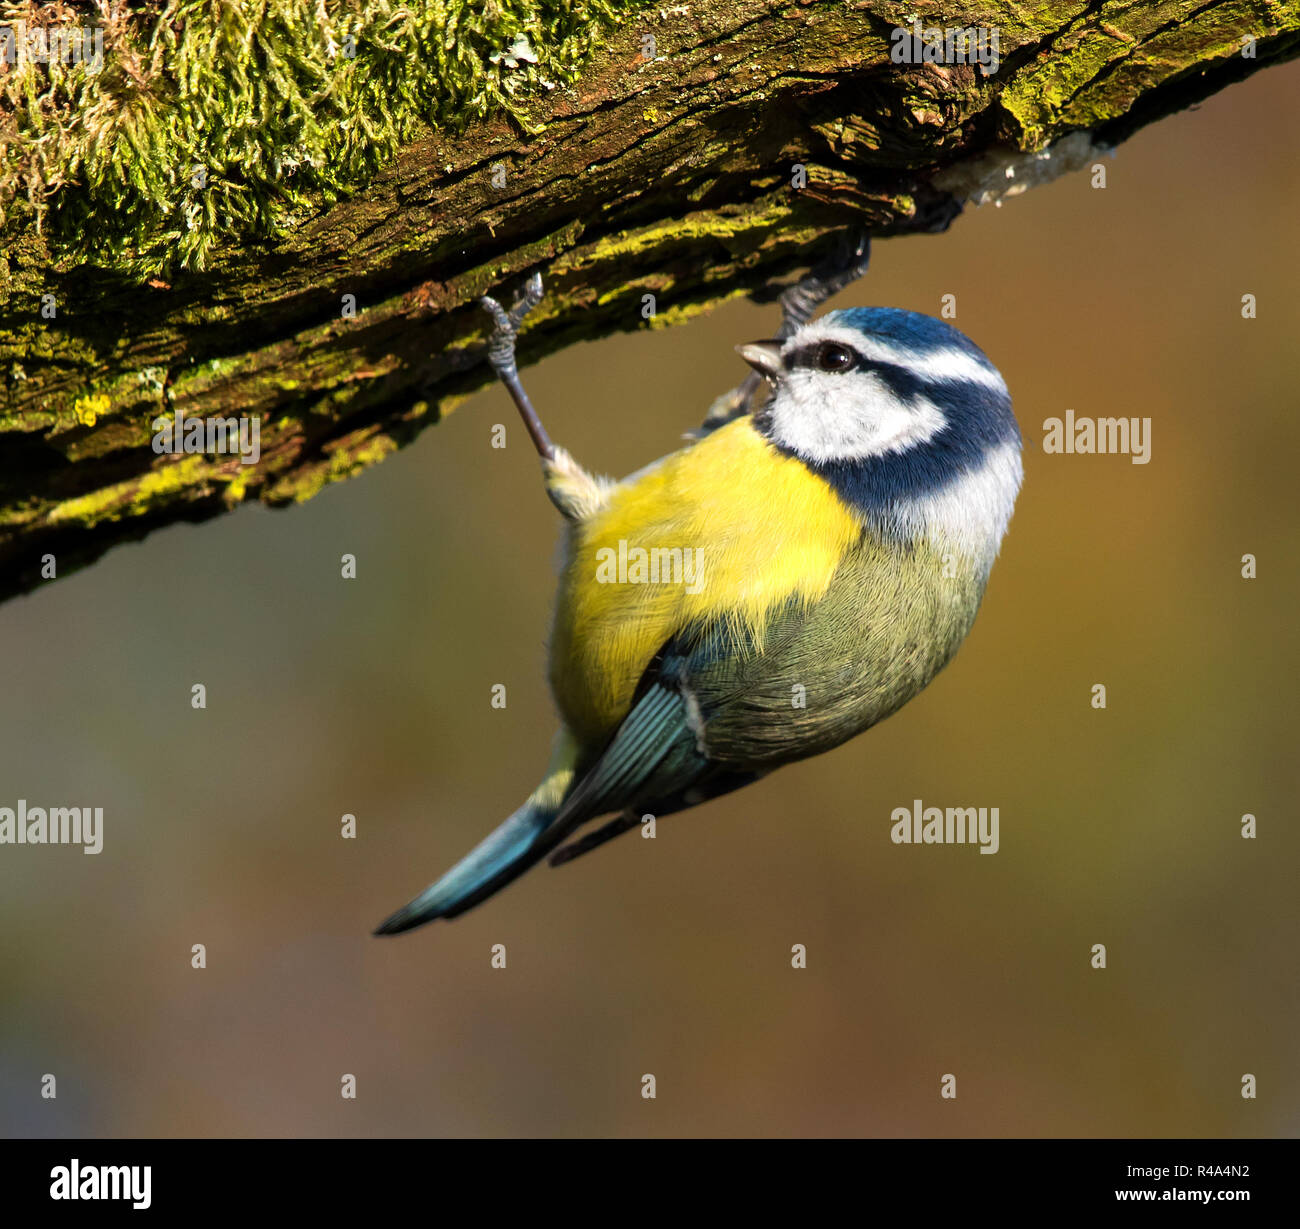 Blue Tit hanging upside down on tree trunk Stock Photo - Alamy